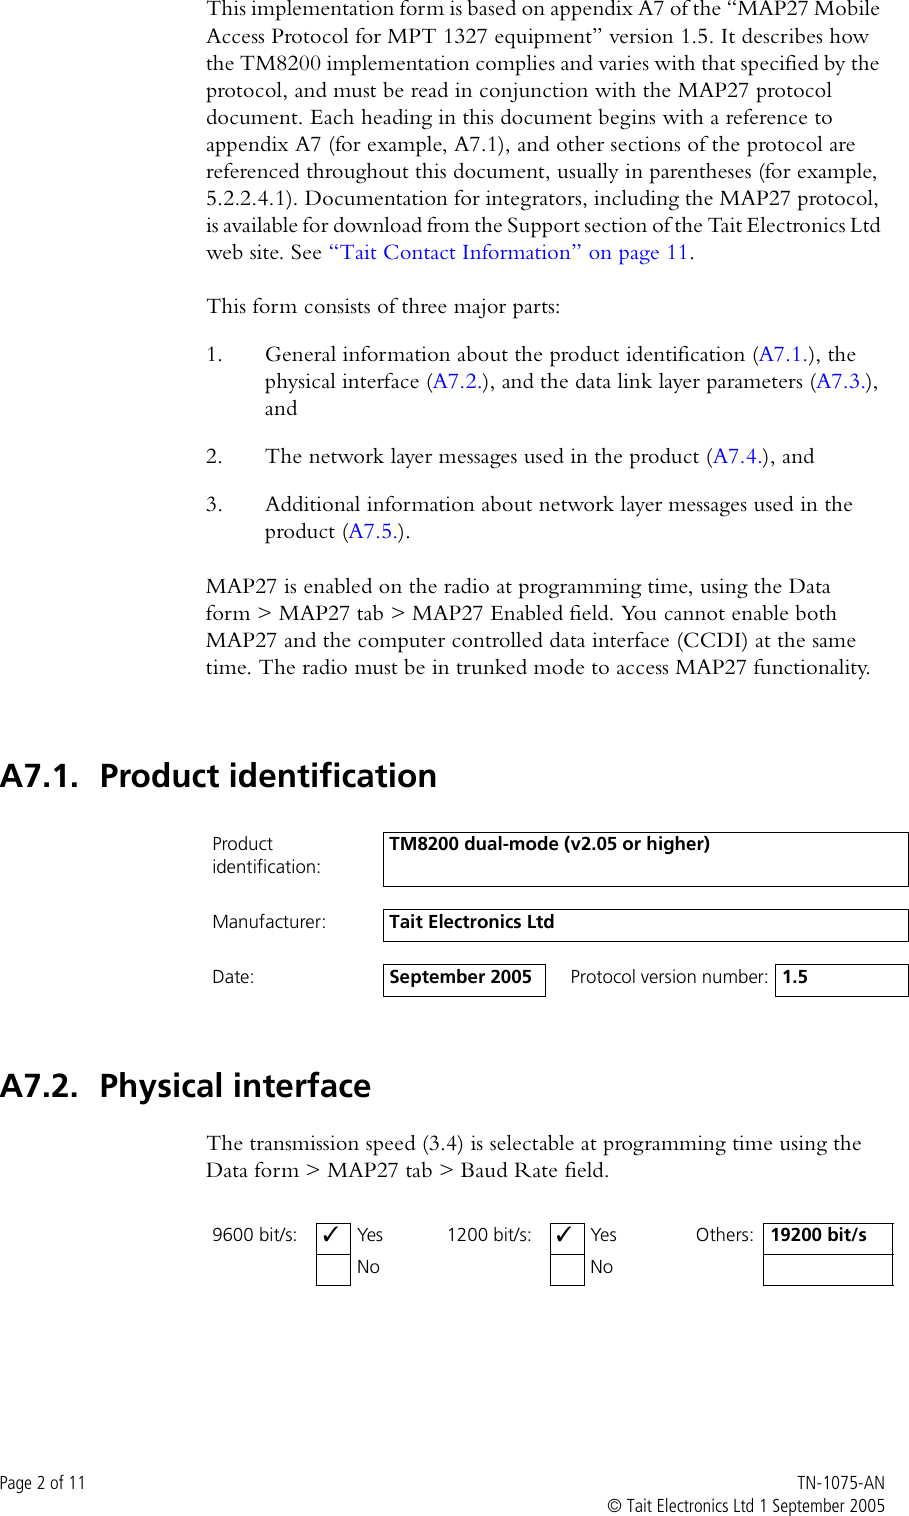 Page 2 of 11 - MAP27 Implementation Form TECHNOTE/TM8000/TN-1075-AN_TM8200 TN-1075-AN TM8200